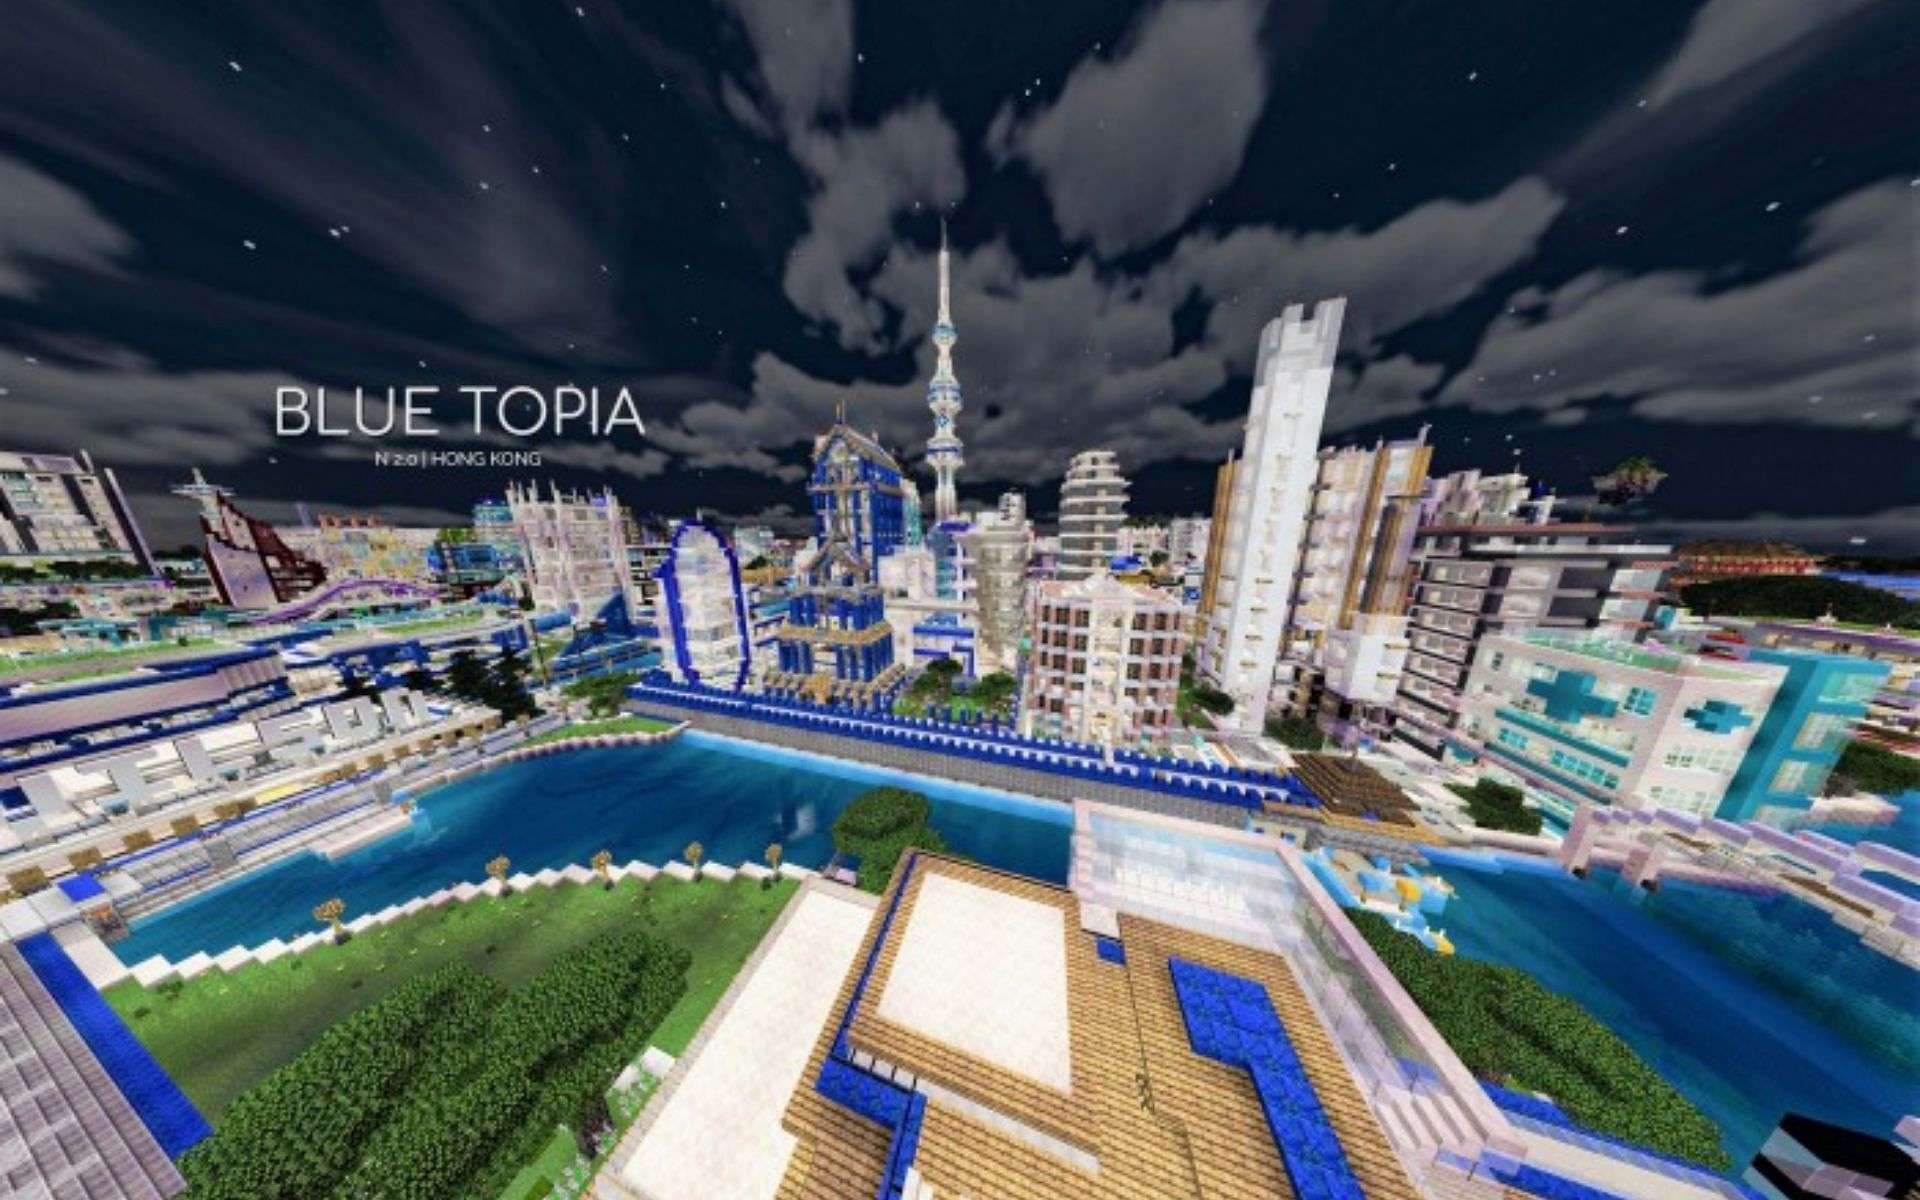 Stunning map of Blue Topia (Image via MCPEDL)